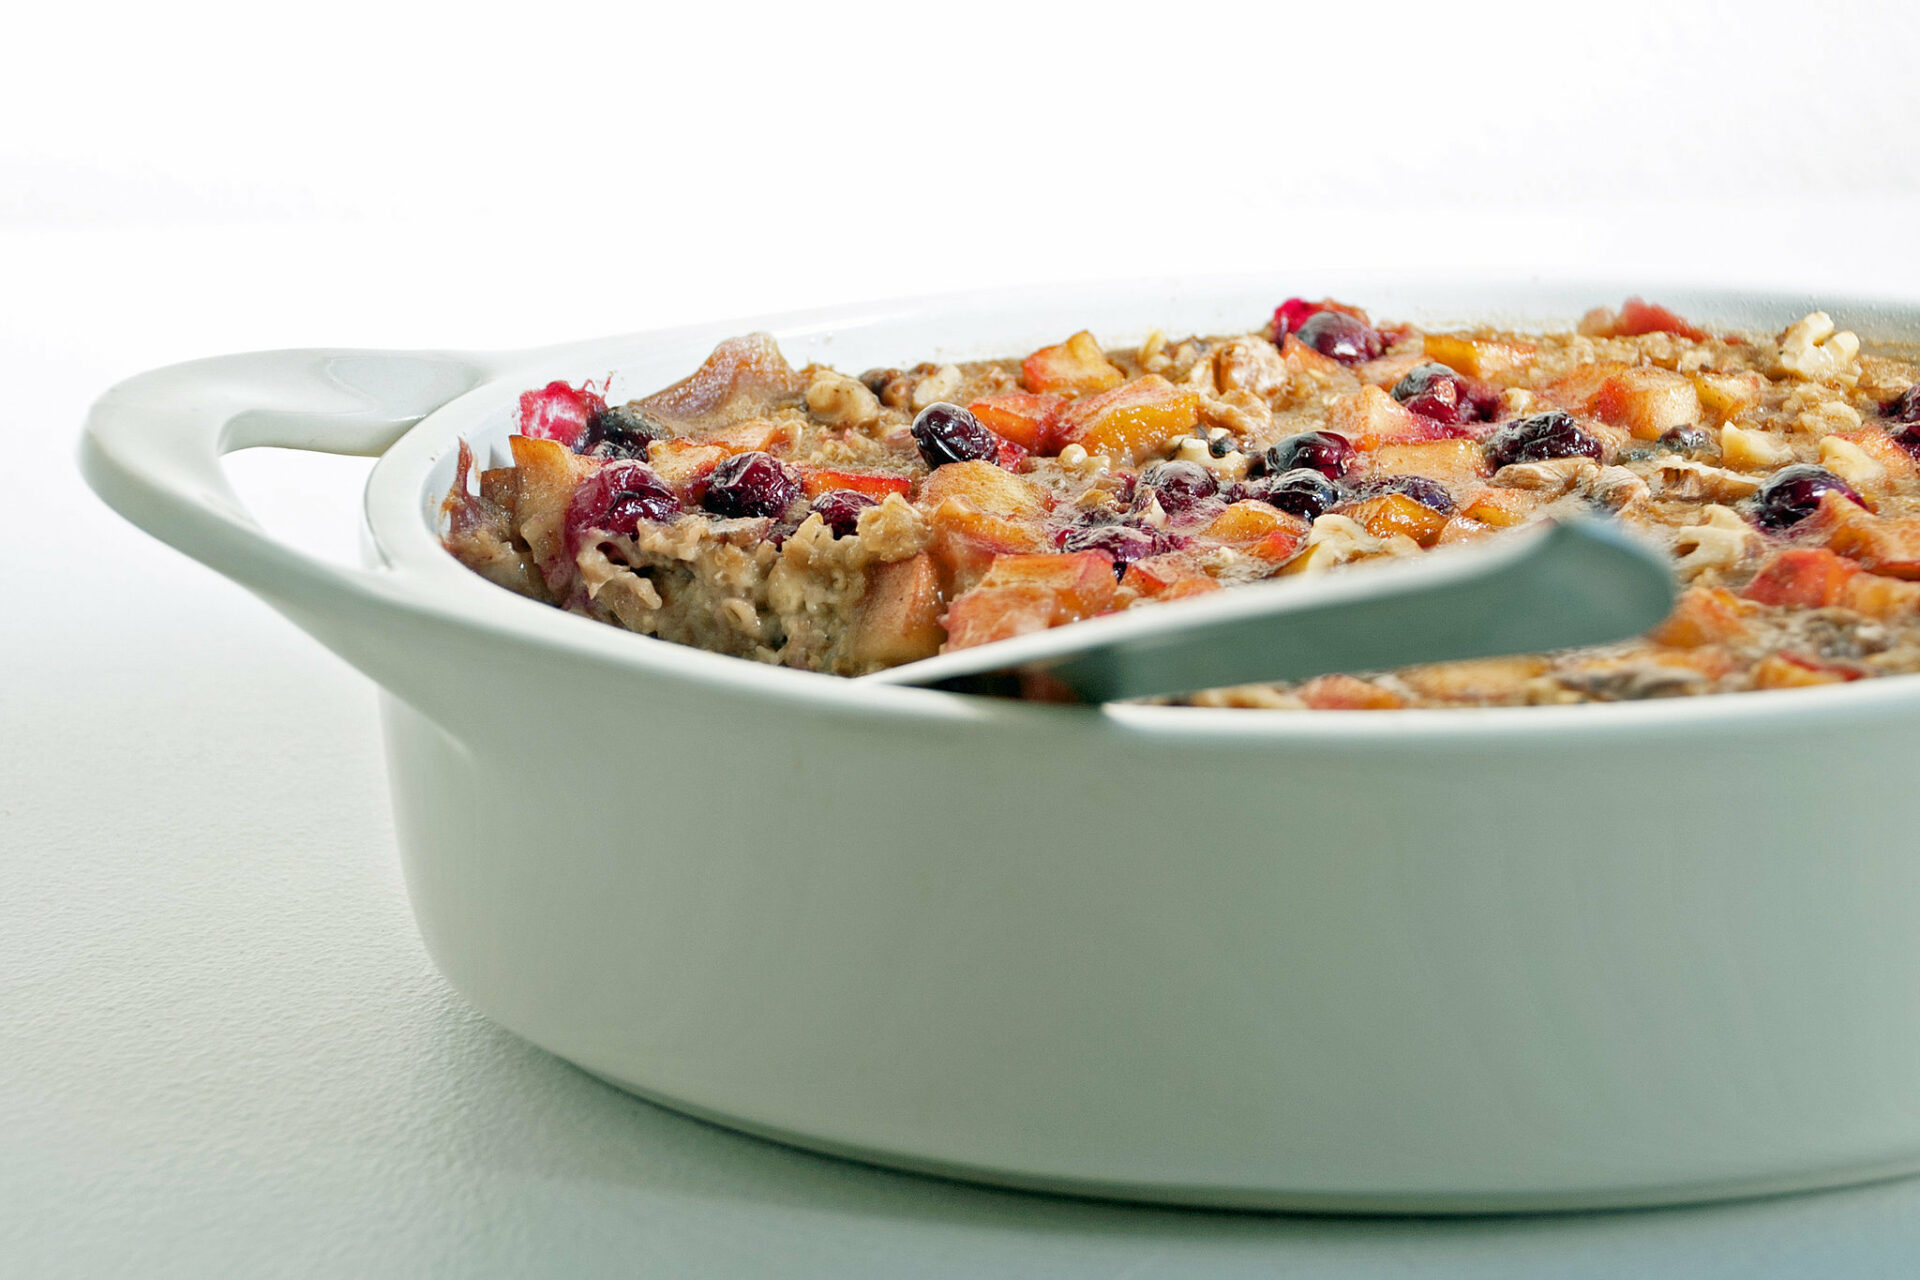 Recipe of the week – Cranberry & Apple Baked Oatmeal